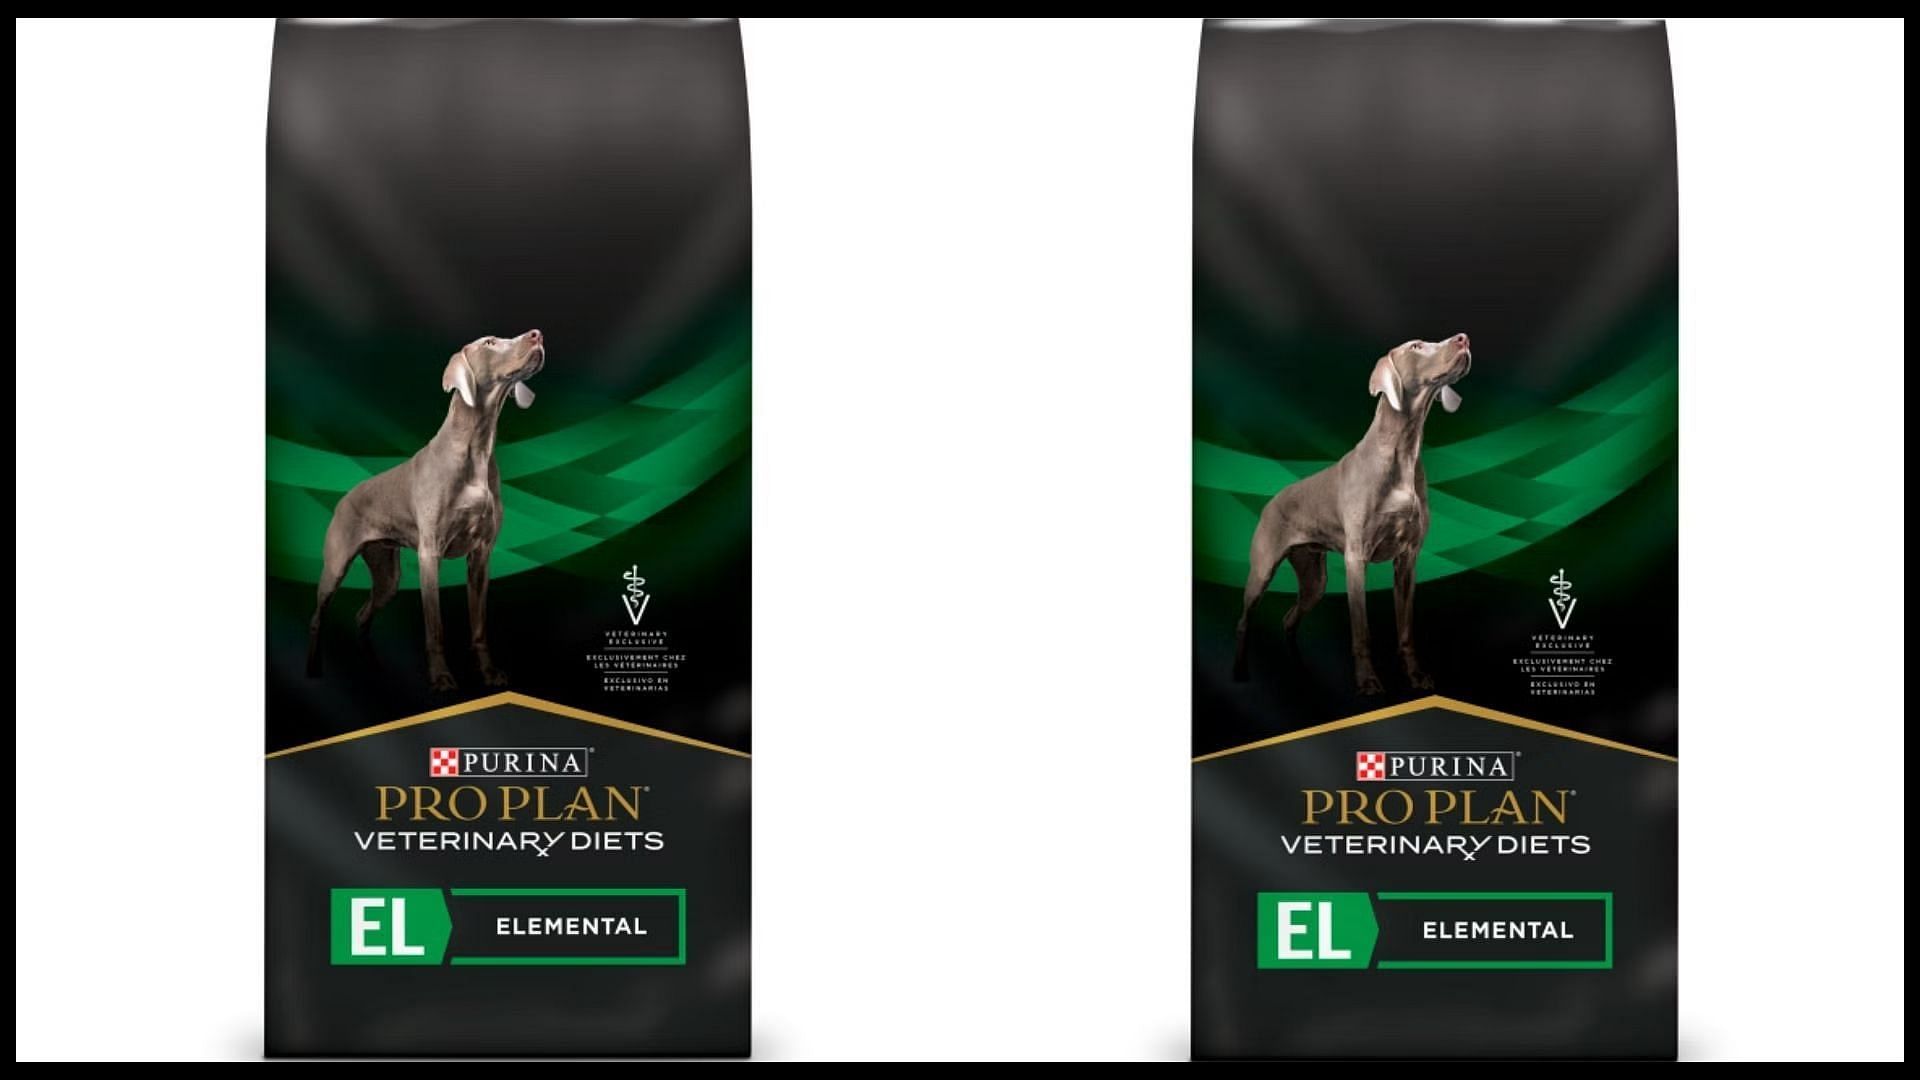 Purina pro plan recall UPC code, reason, products, and more